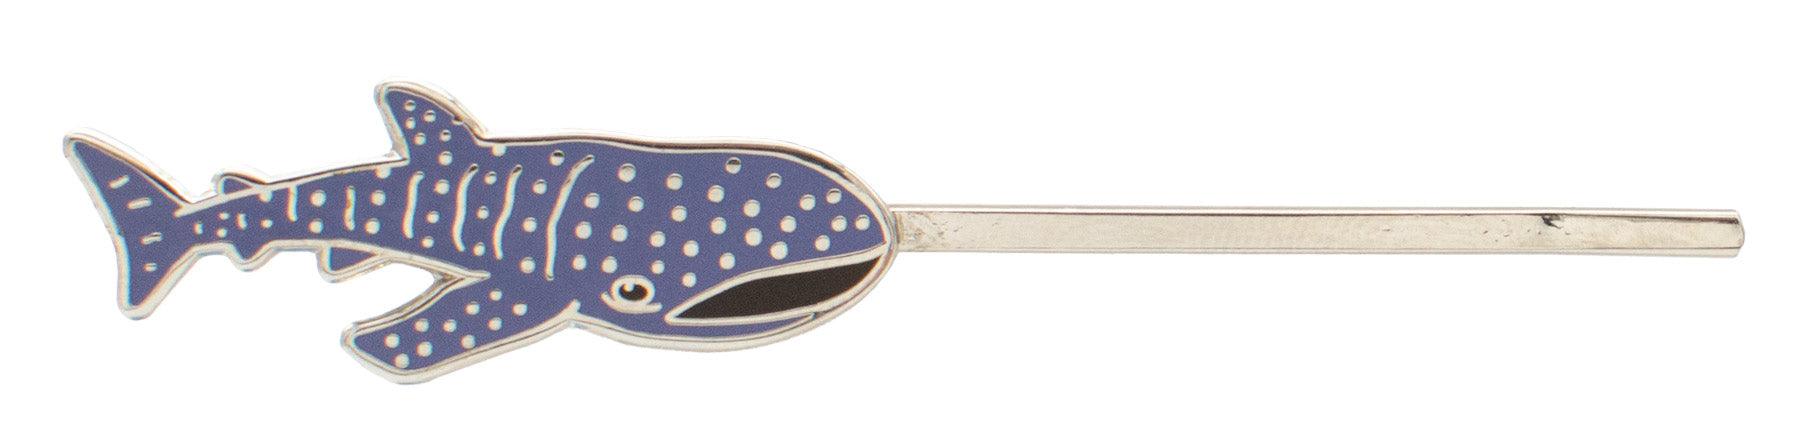 Product photo of Shark Hair Pins, a novelty gift manufactured by The Unemployed Philosophers Guild.